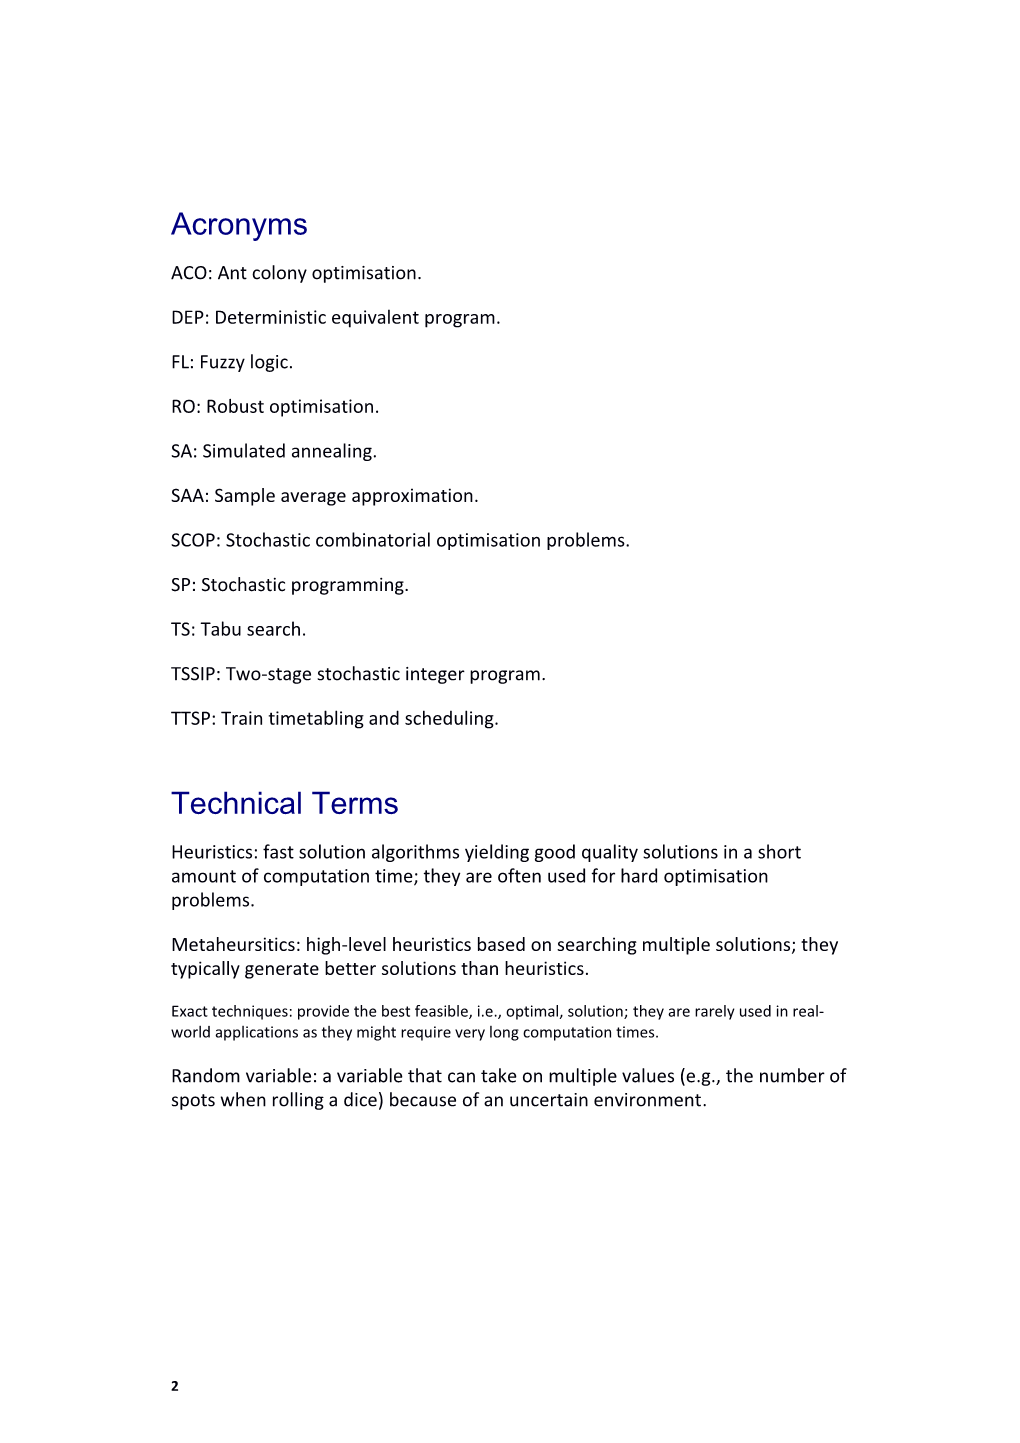 RSSB A4 Document Template with Numbered Headings